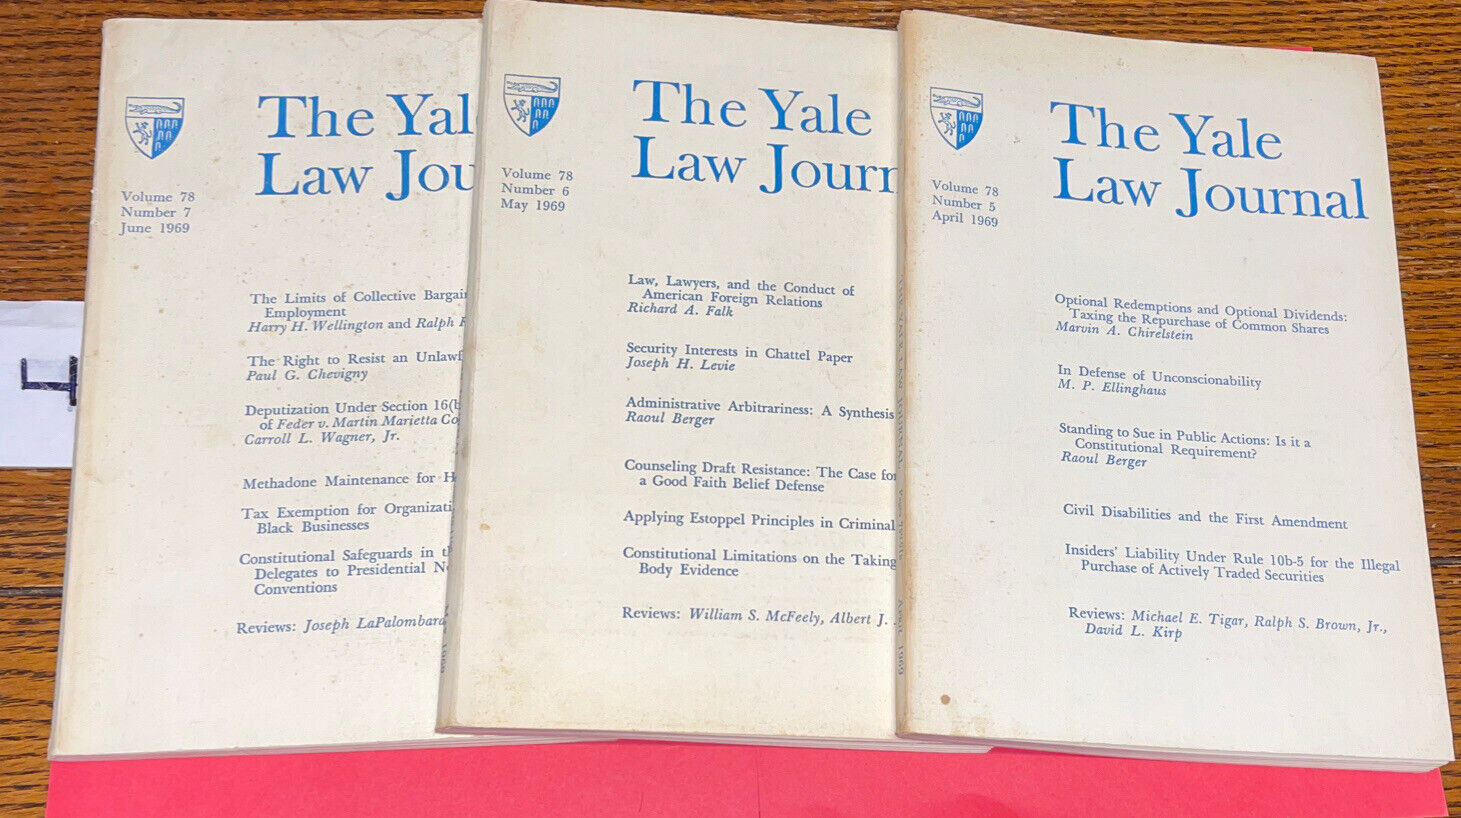 The Yale Law Journal Volume 78 Number 5,6,7 April 1969